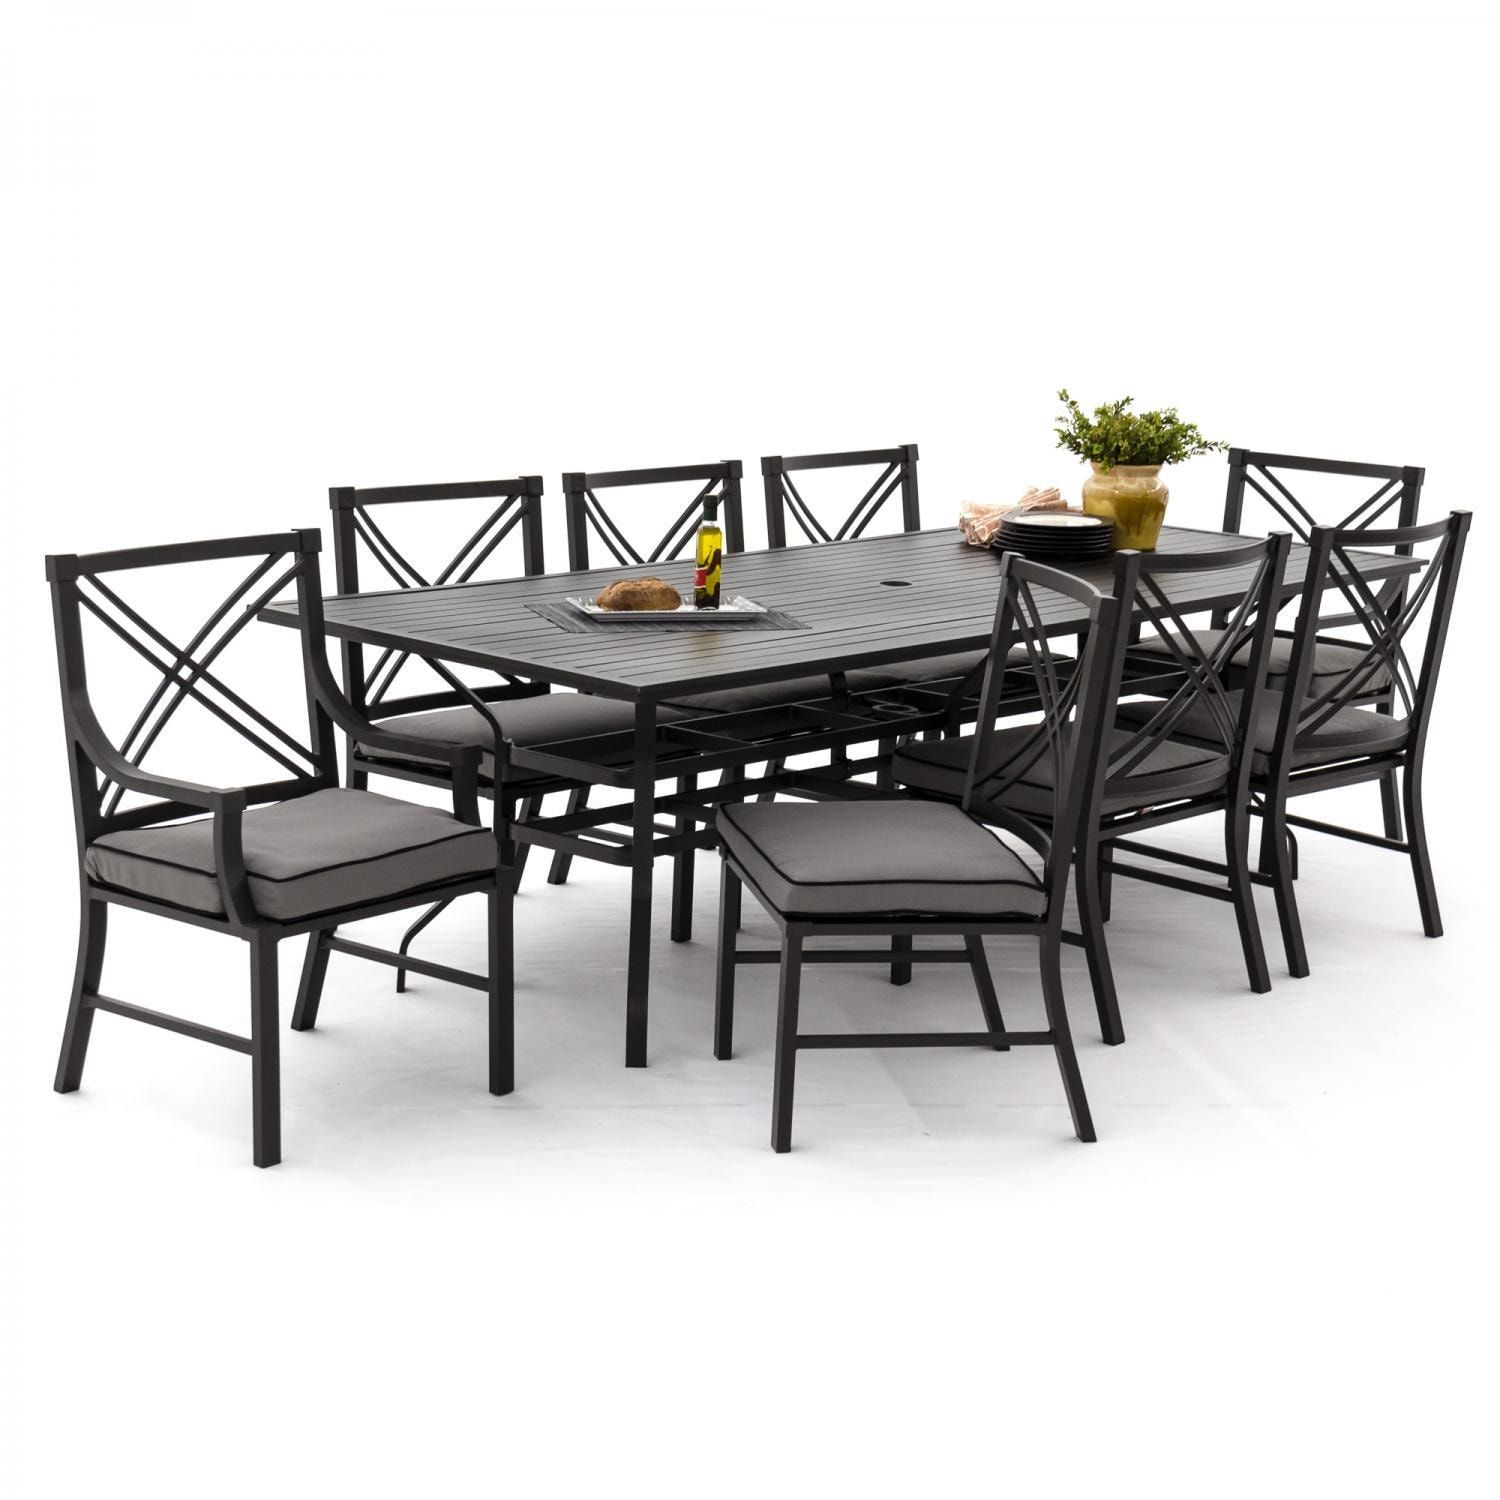 Audubon 9 Piece Aluminum Patio Dining Set With 6 Side Chairs And Regarding Rectangular Outdoor Patio Dining Sets (View 9 of 15)